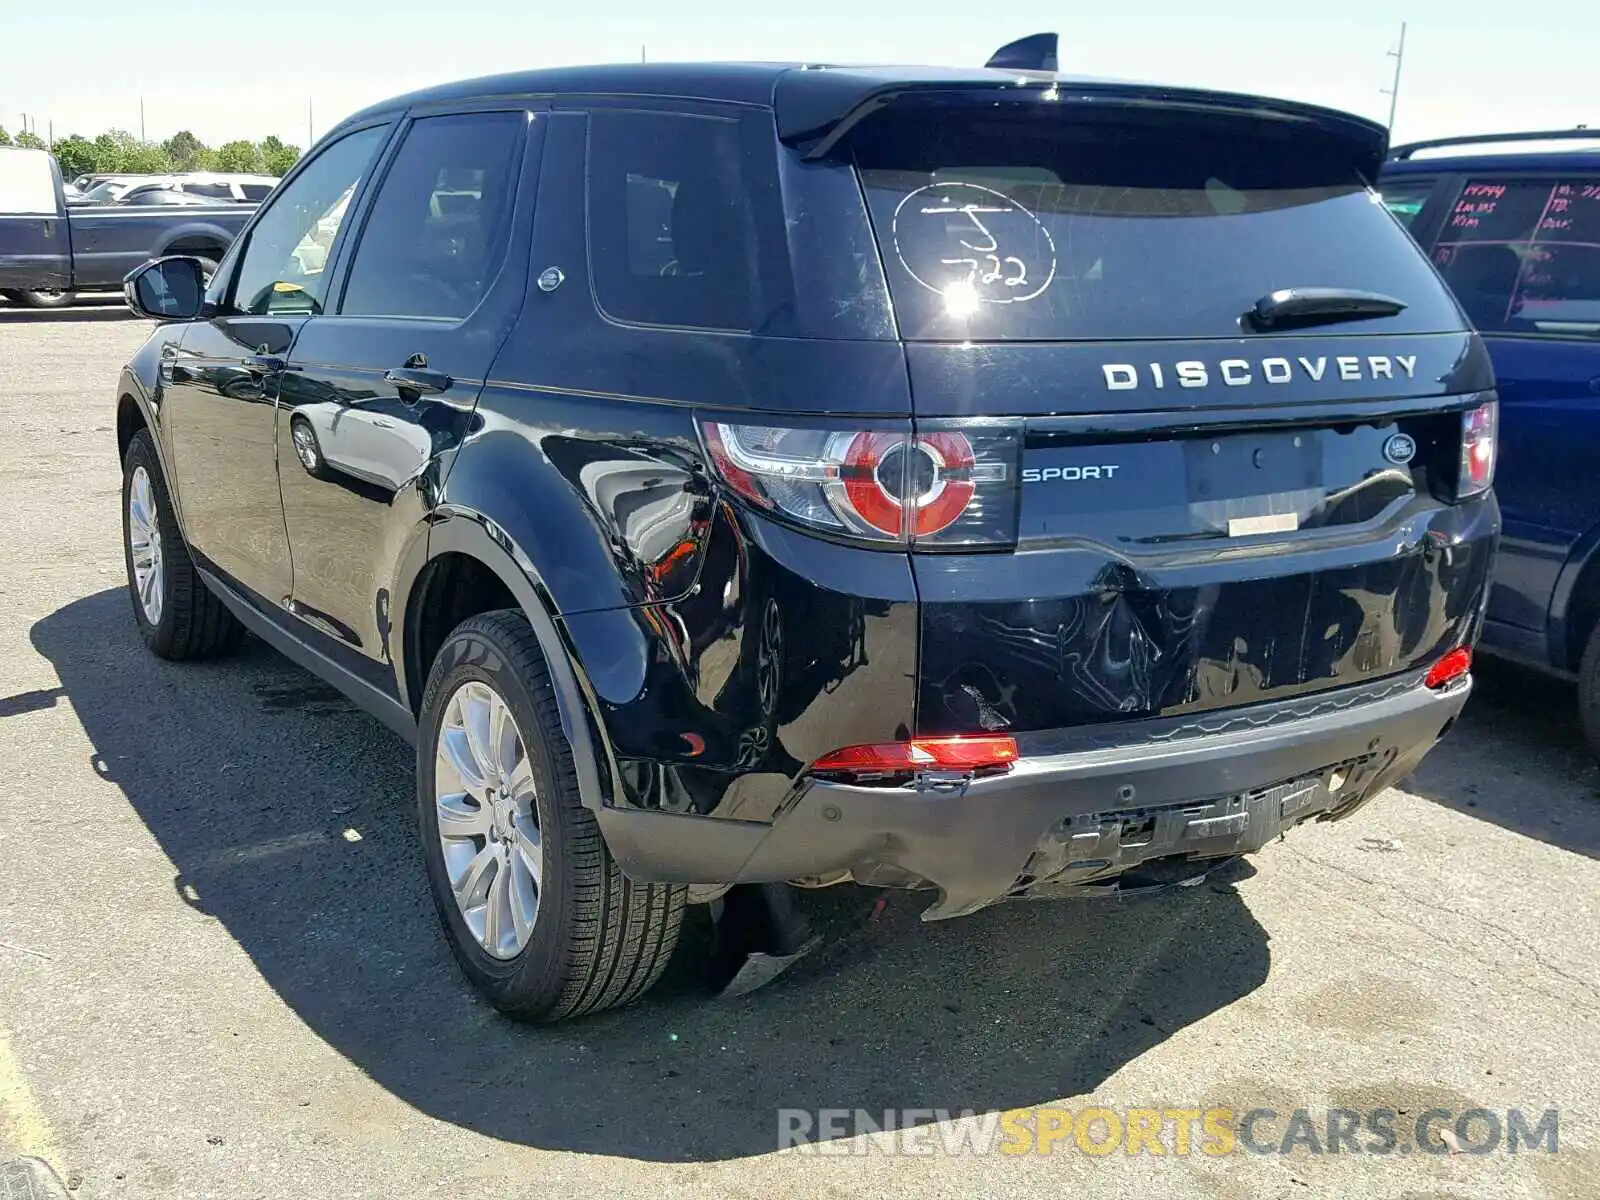 3 Photograph of a damaged car SALCP2FX2KH808260 LAND ROVER DISCOVERY 2019